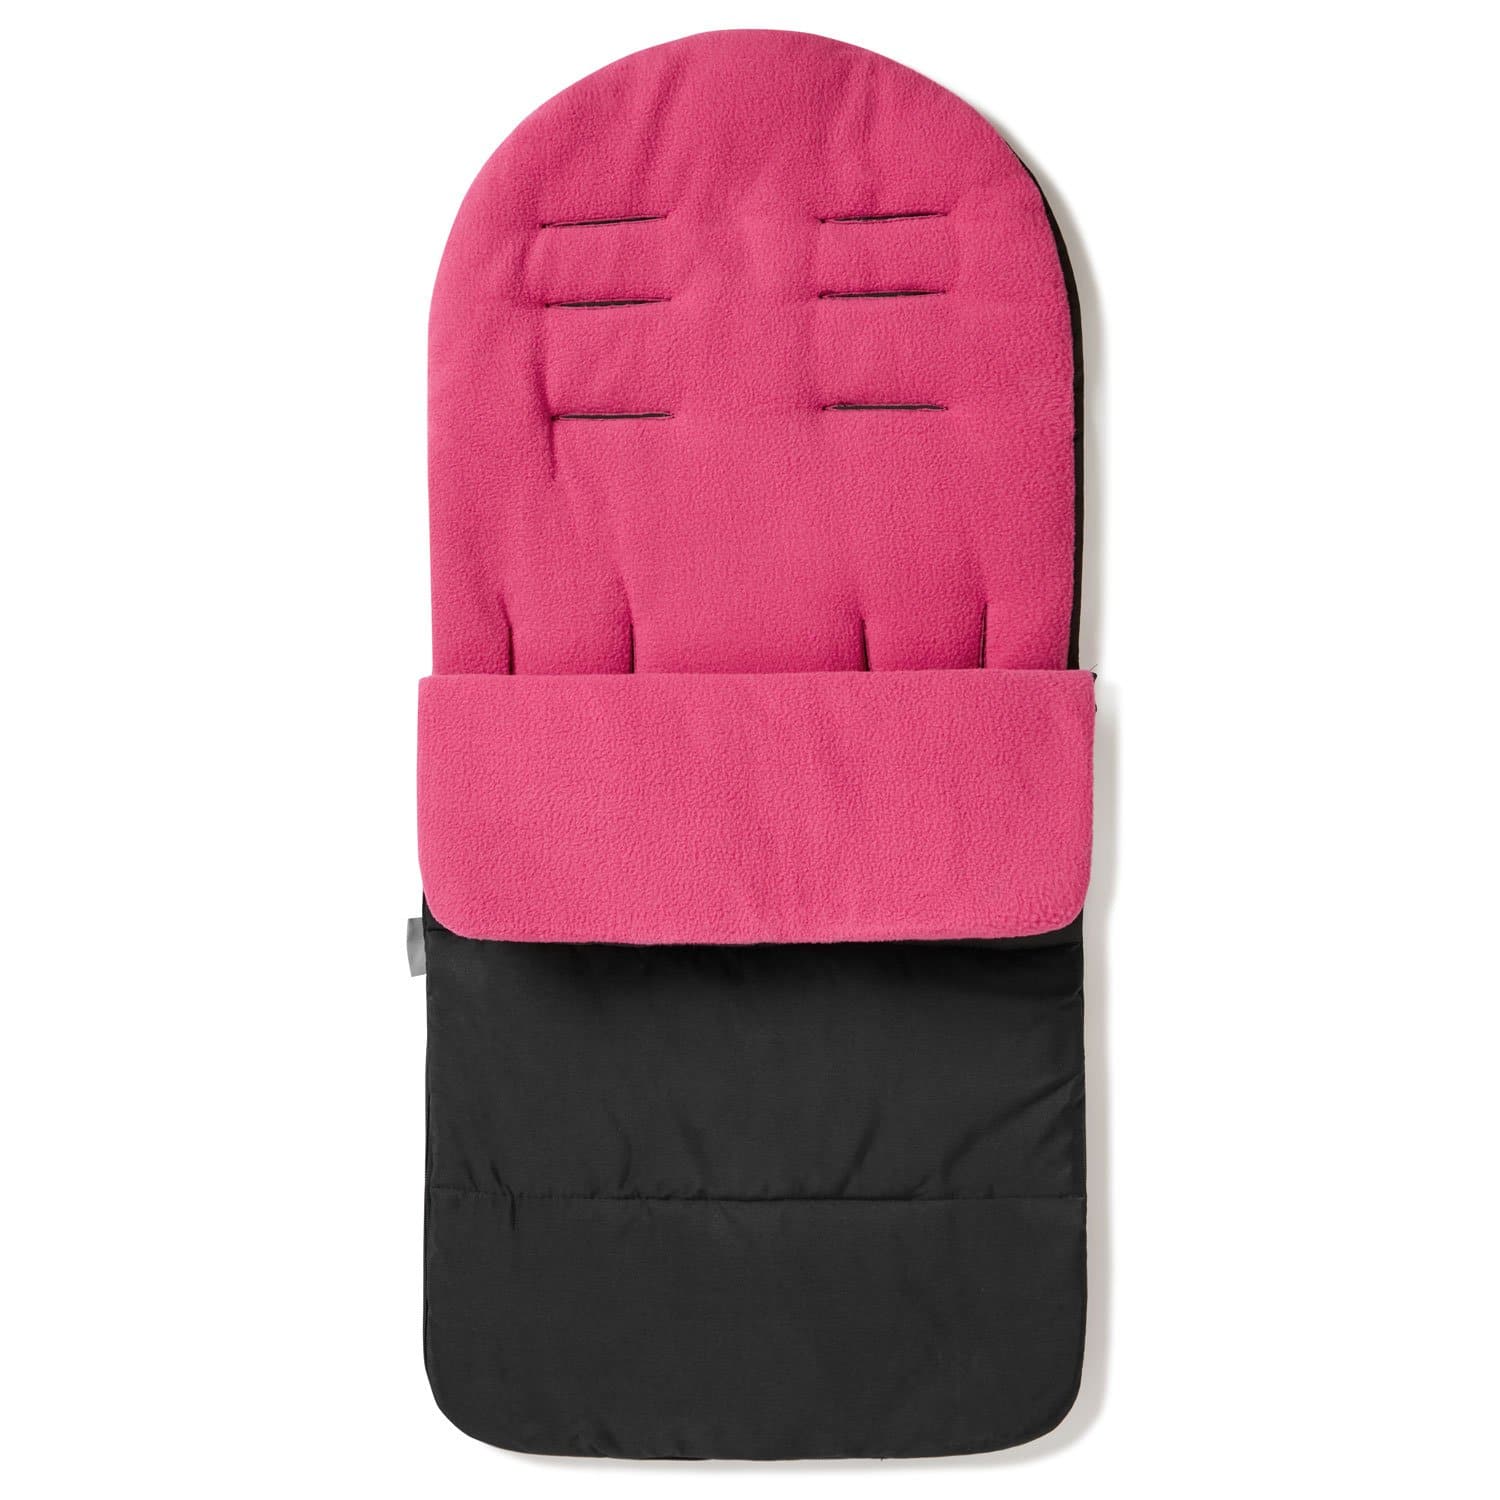 Premium Footmuff / Cosy Toes Compatible with Babywelt - Pink Rose / Fits All Models | For Your Little One